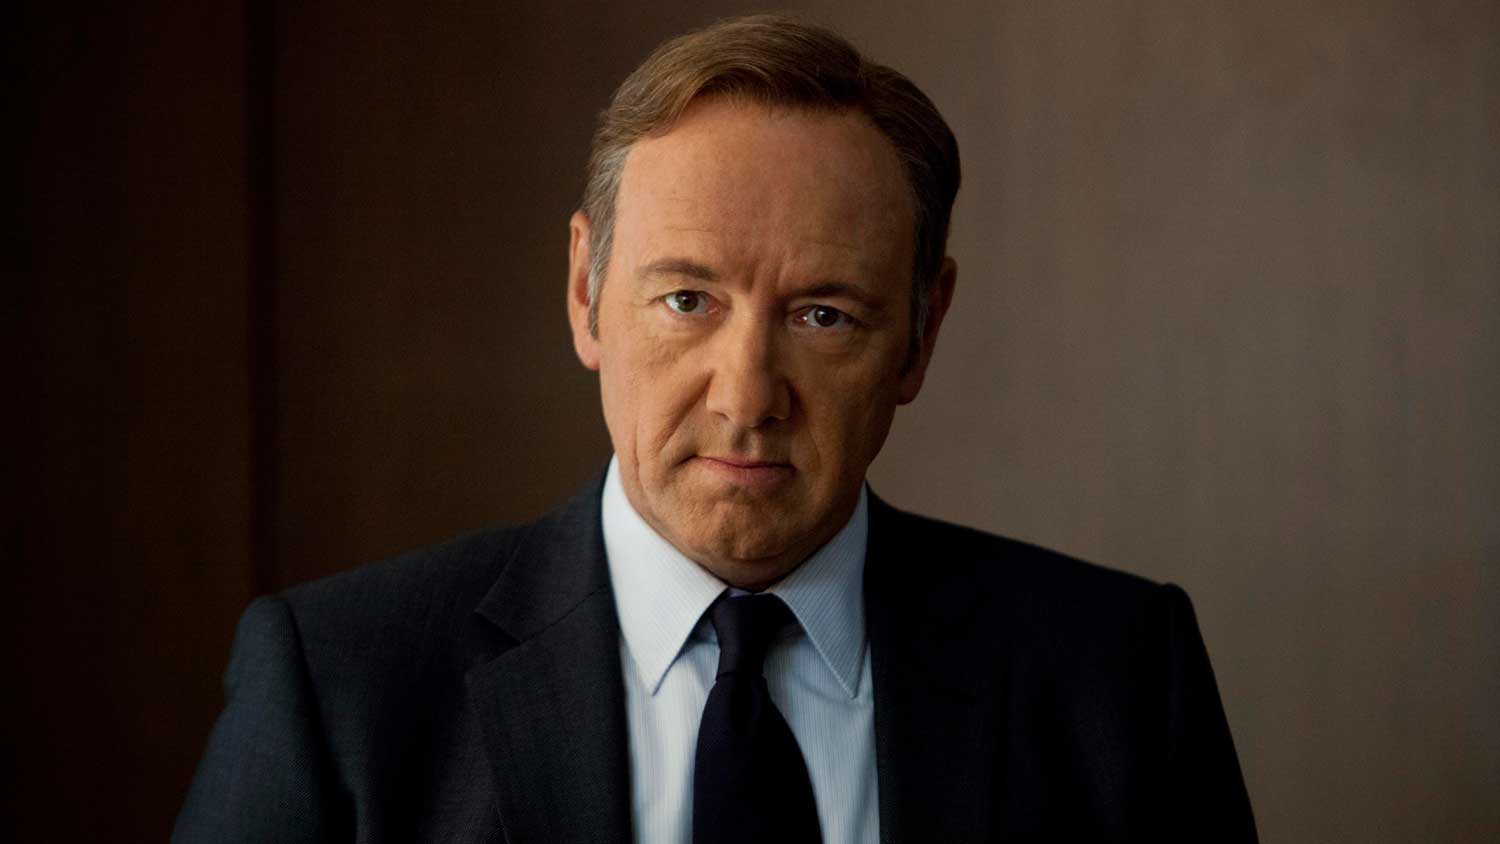 house-of-cards-kevin-spacey